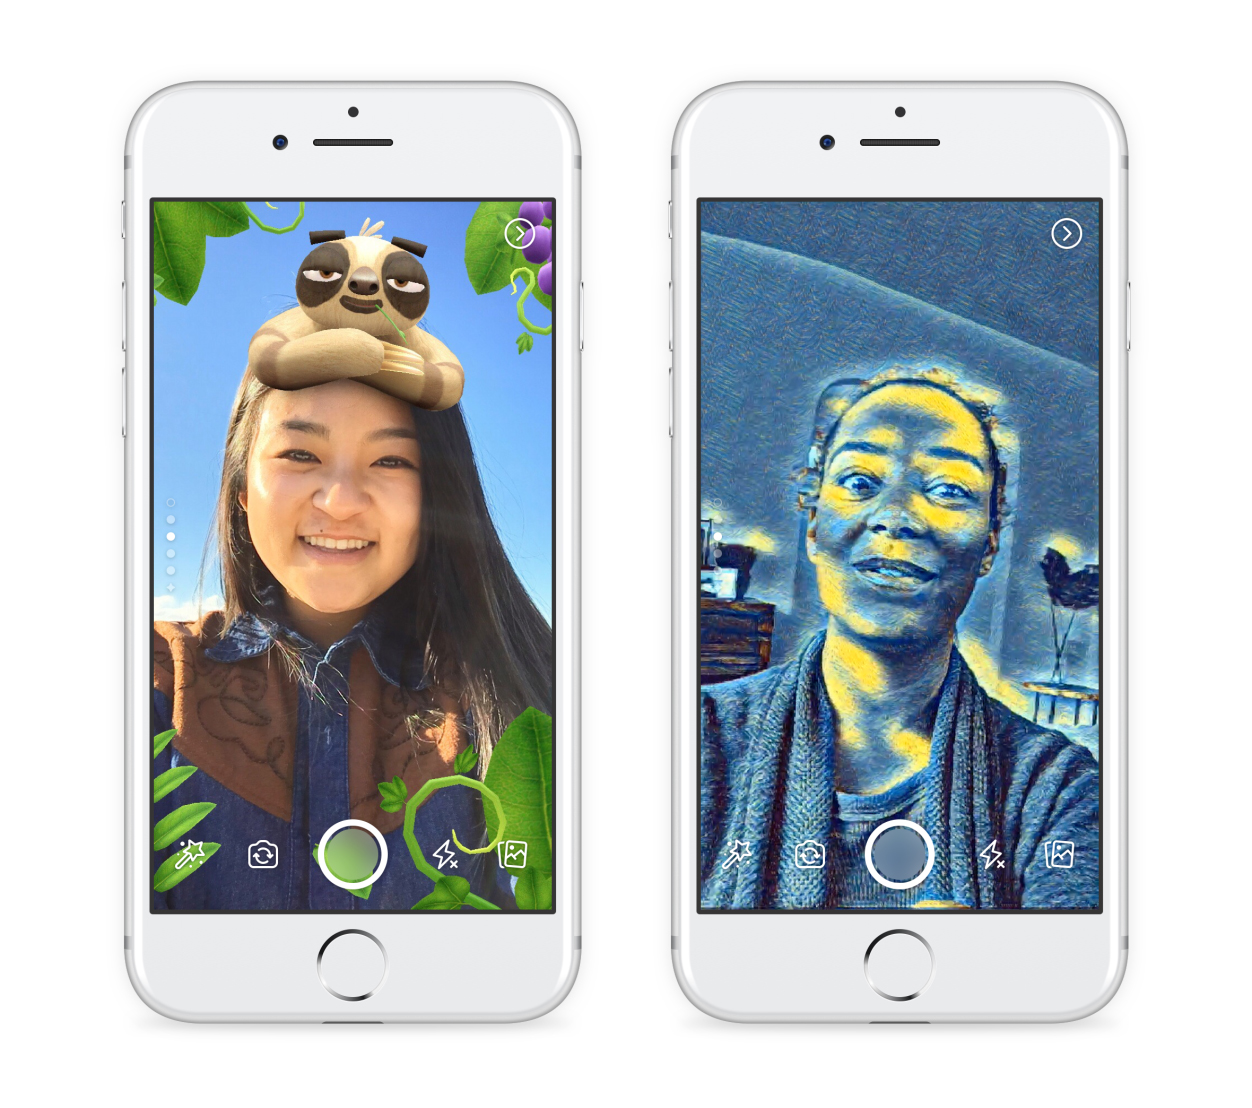 Facebook Officially Announces Camera Effects, Stories, Direct Sharing [Video]